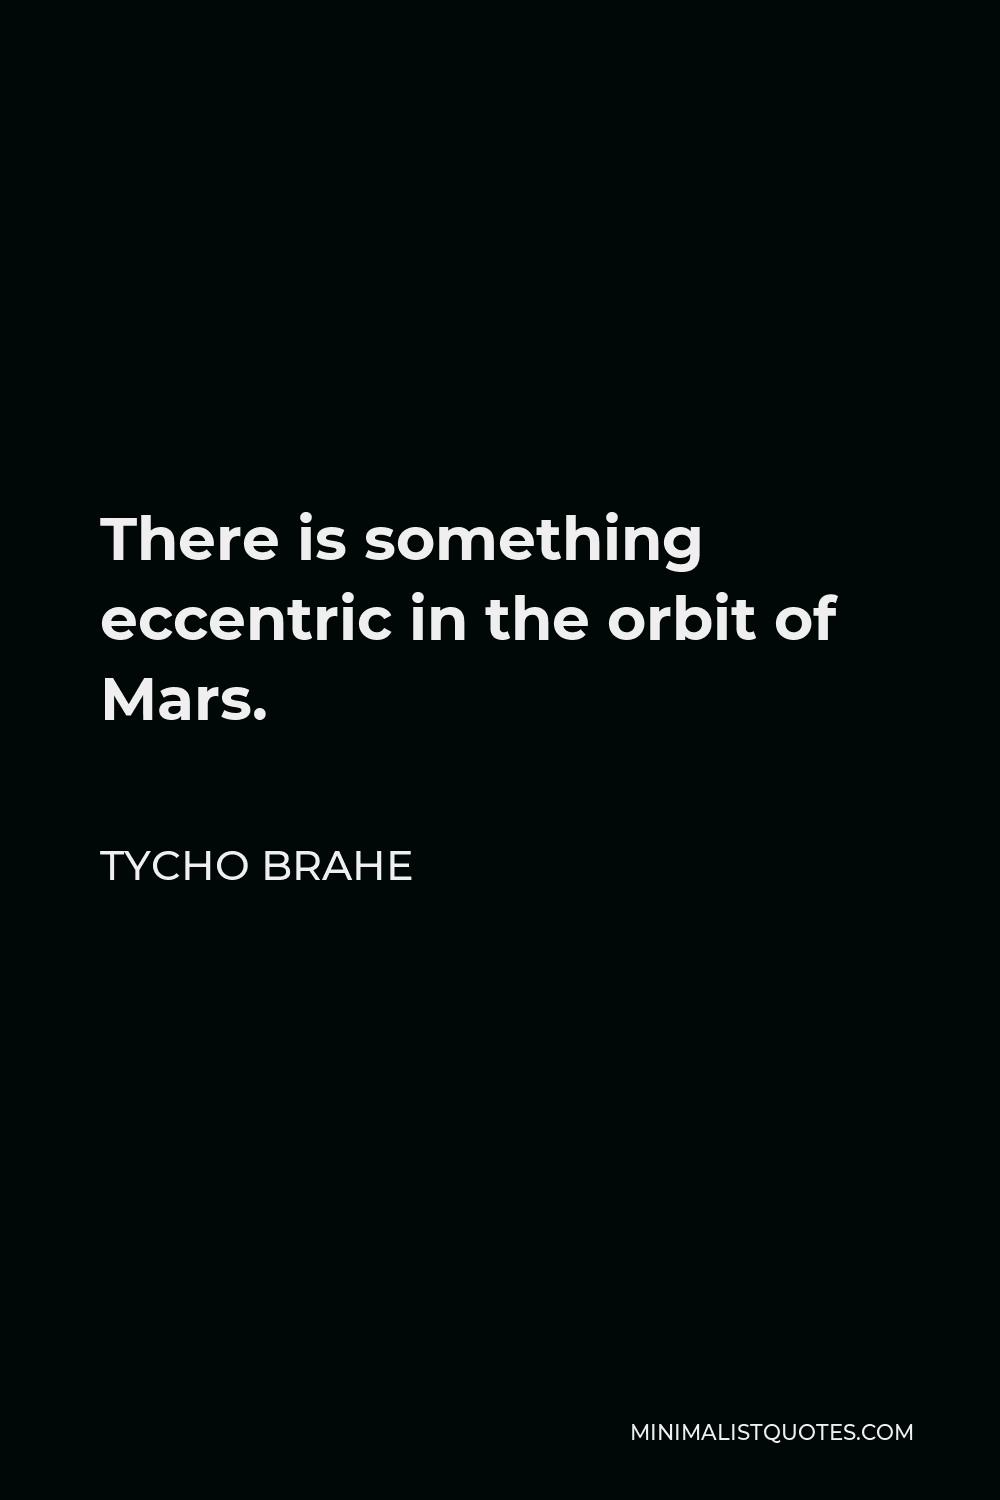 Tycho Brahe Quote - There is something eccentric in the orbit of Mars.